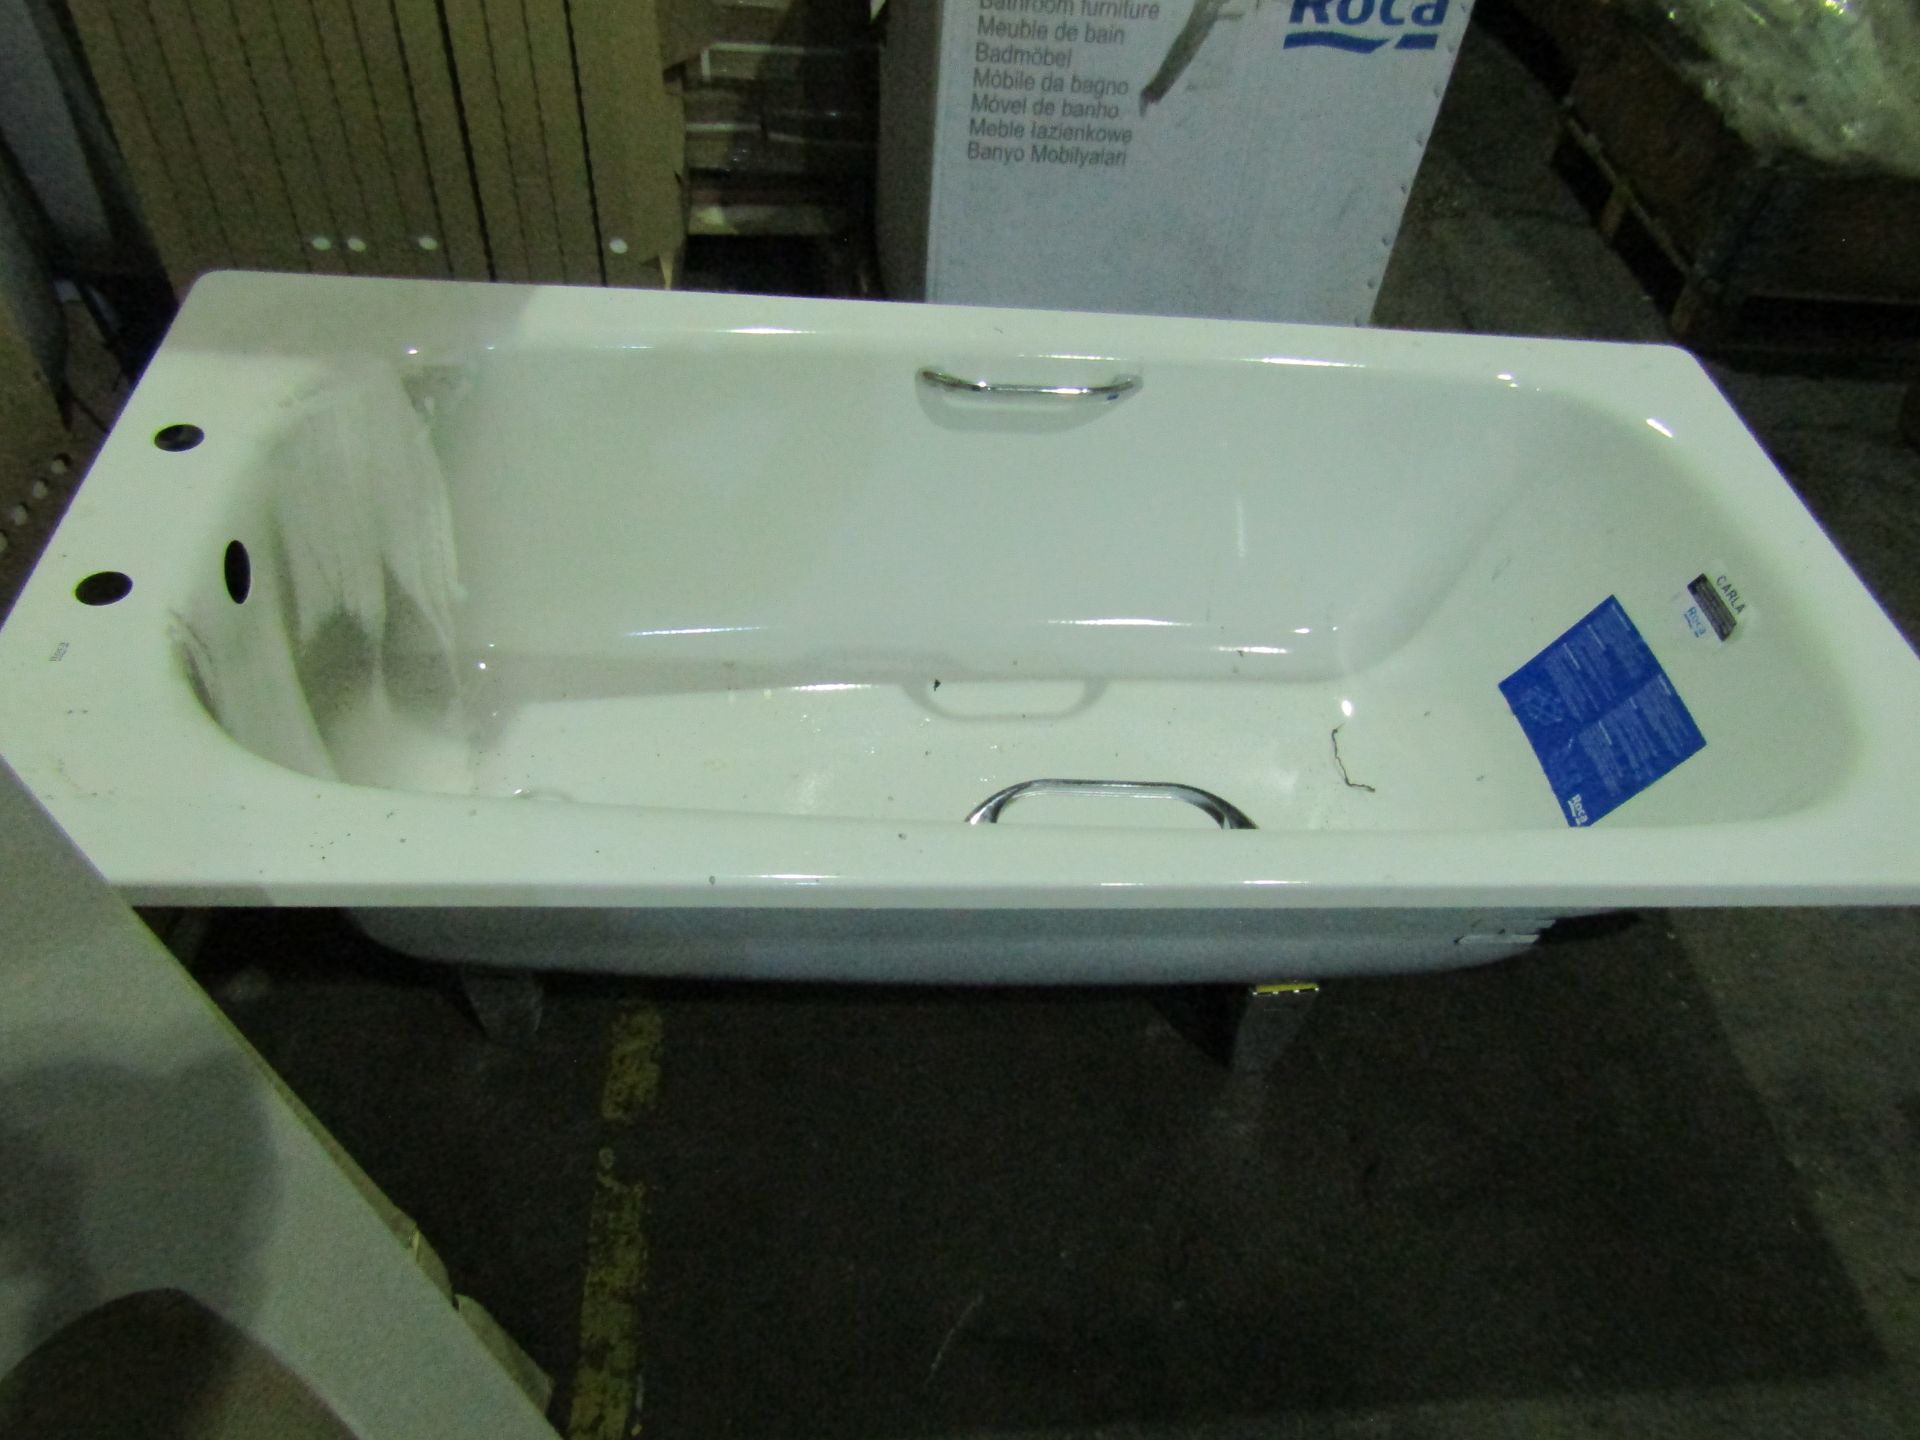 Roca - Carla Steel Bathtub White - 1500x700mm - Unused & Boxed, come with handles and feet. RRP ?